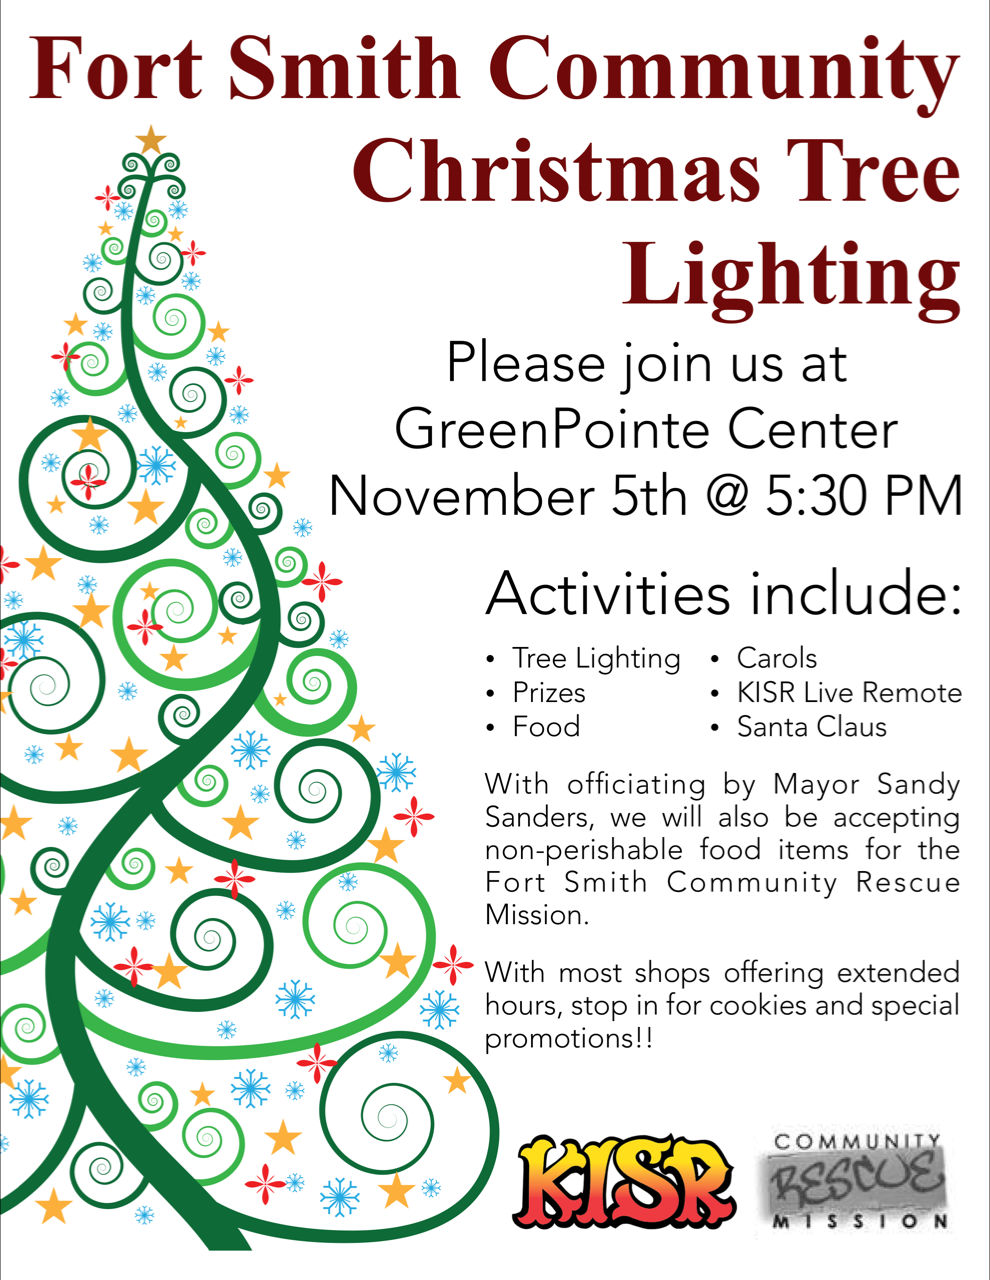 Fort Smith Community Christmas Tree Lighting Things to do in Fort Smith